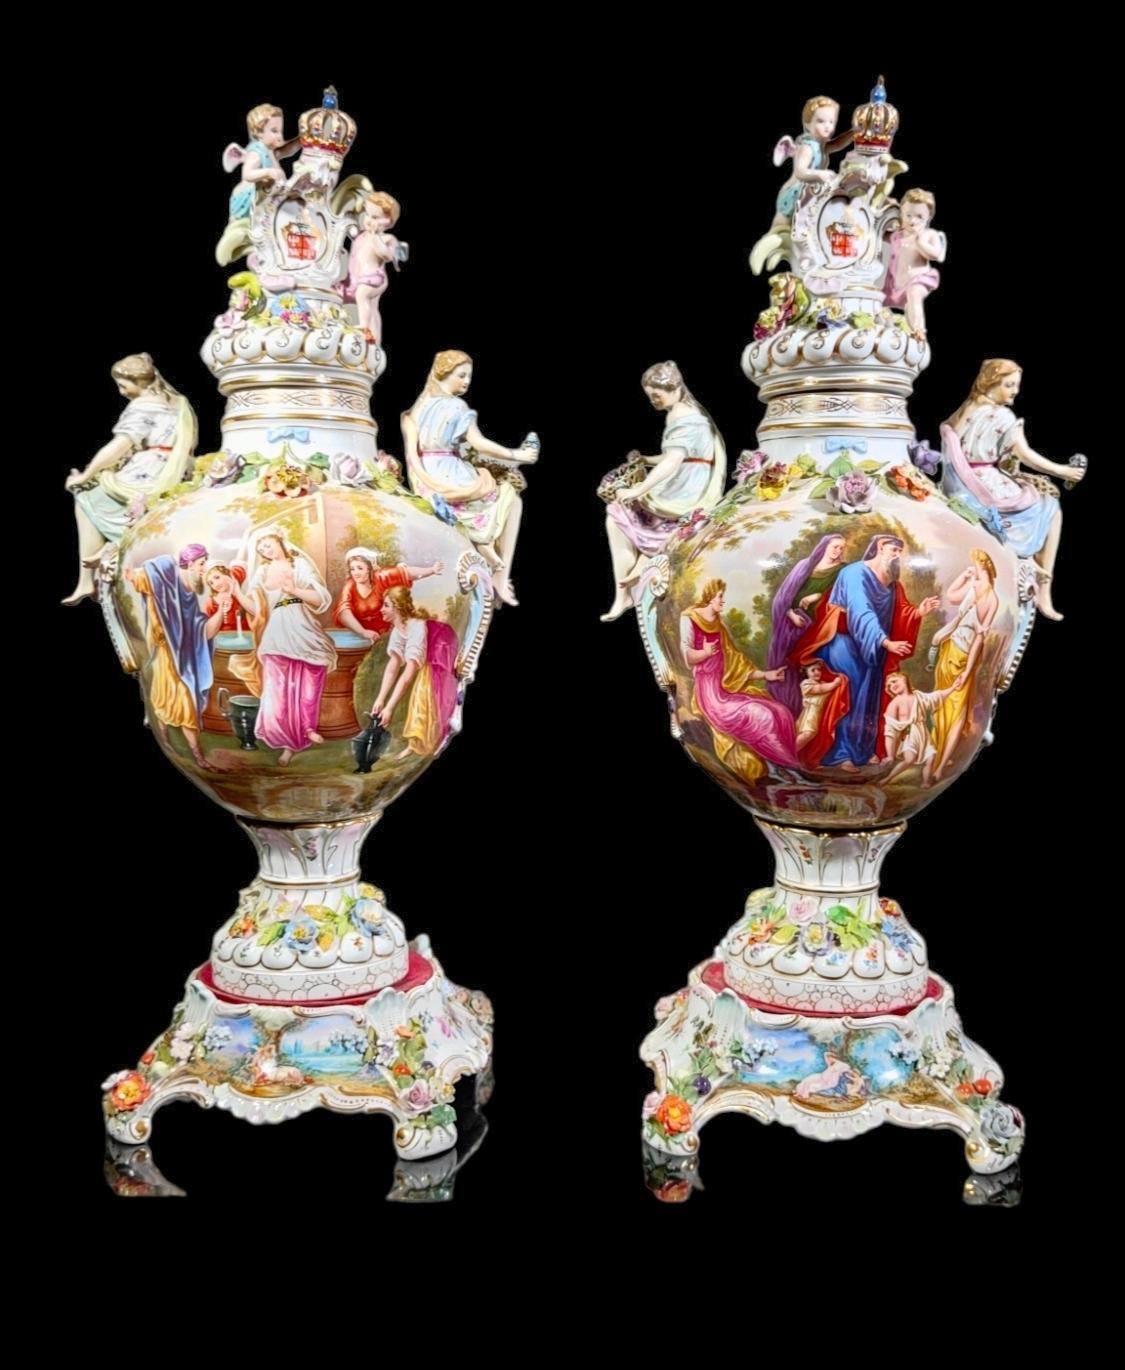 A Pair Of Carl Thieme  German porcelain Vases, Lids And Pedestals (potschappel)
CARL THIEME (GERMAN, 1816-1884) FOR DRESDEN, VASES COVERED IN PAINTED PORCELAIN, THE PAIR. Angels crowning a shield crest and adorning with flowers atop the covers. Each